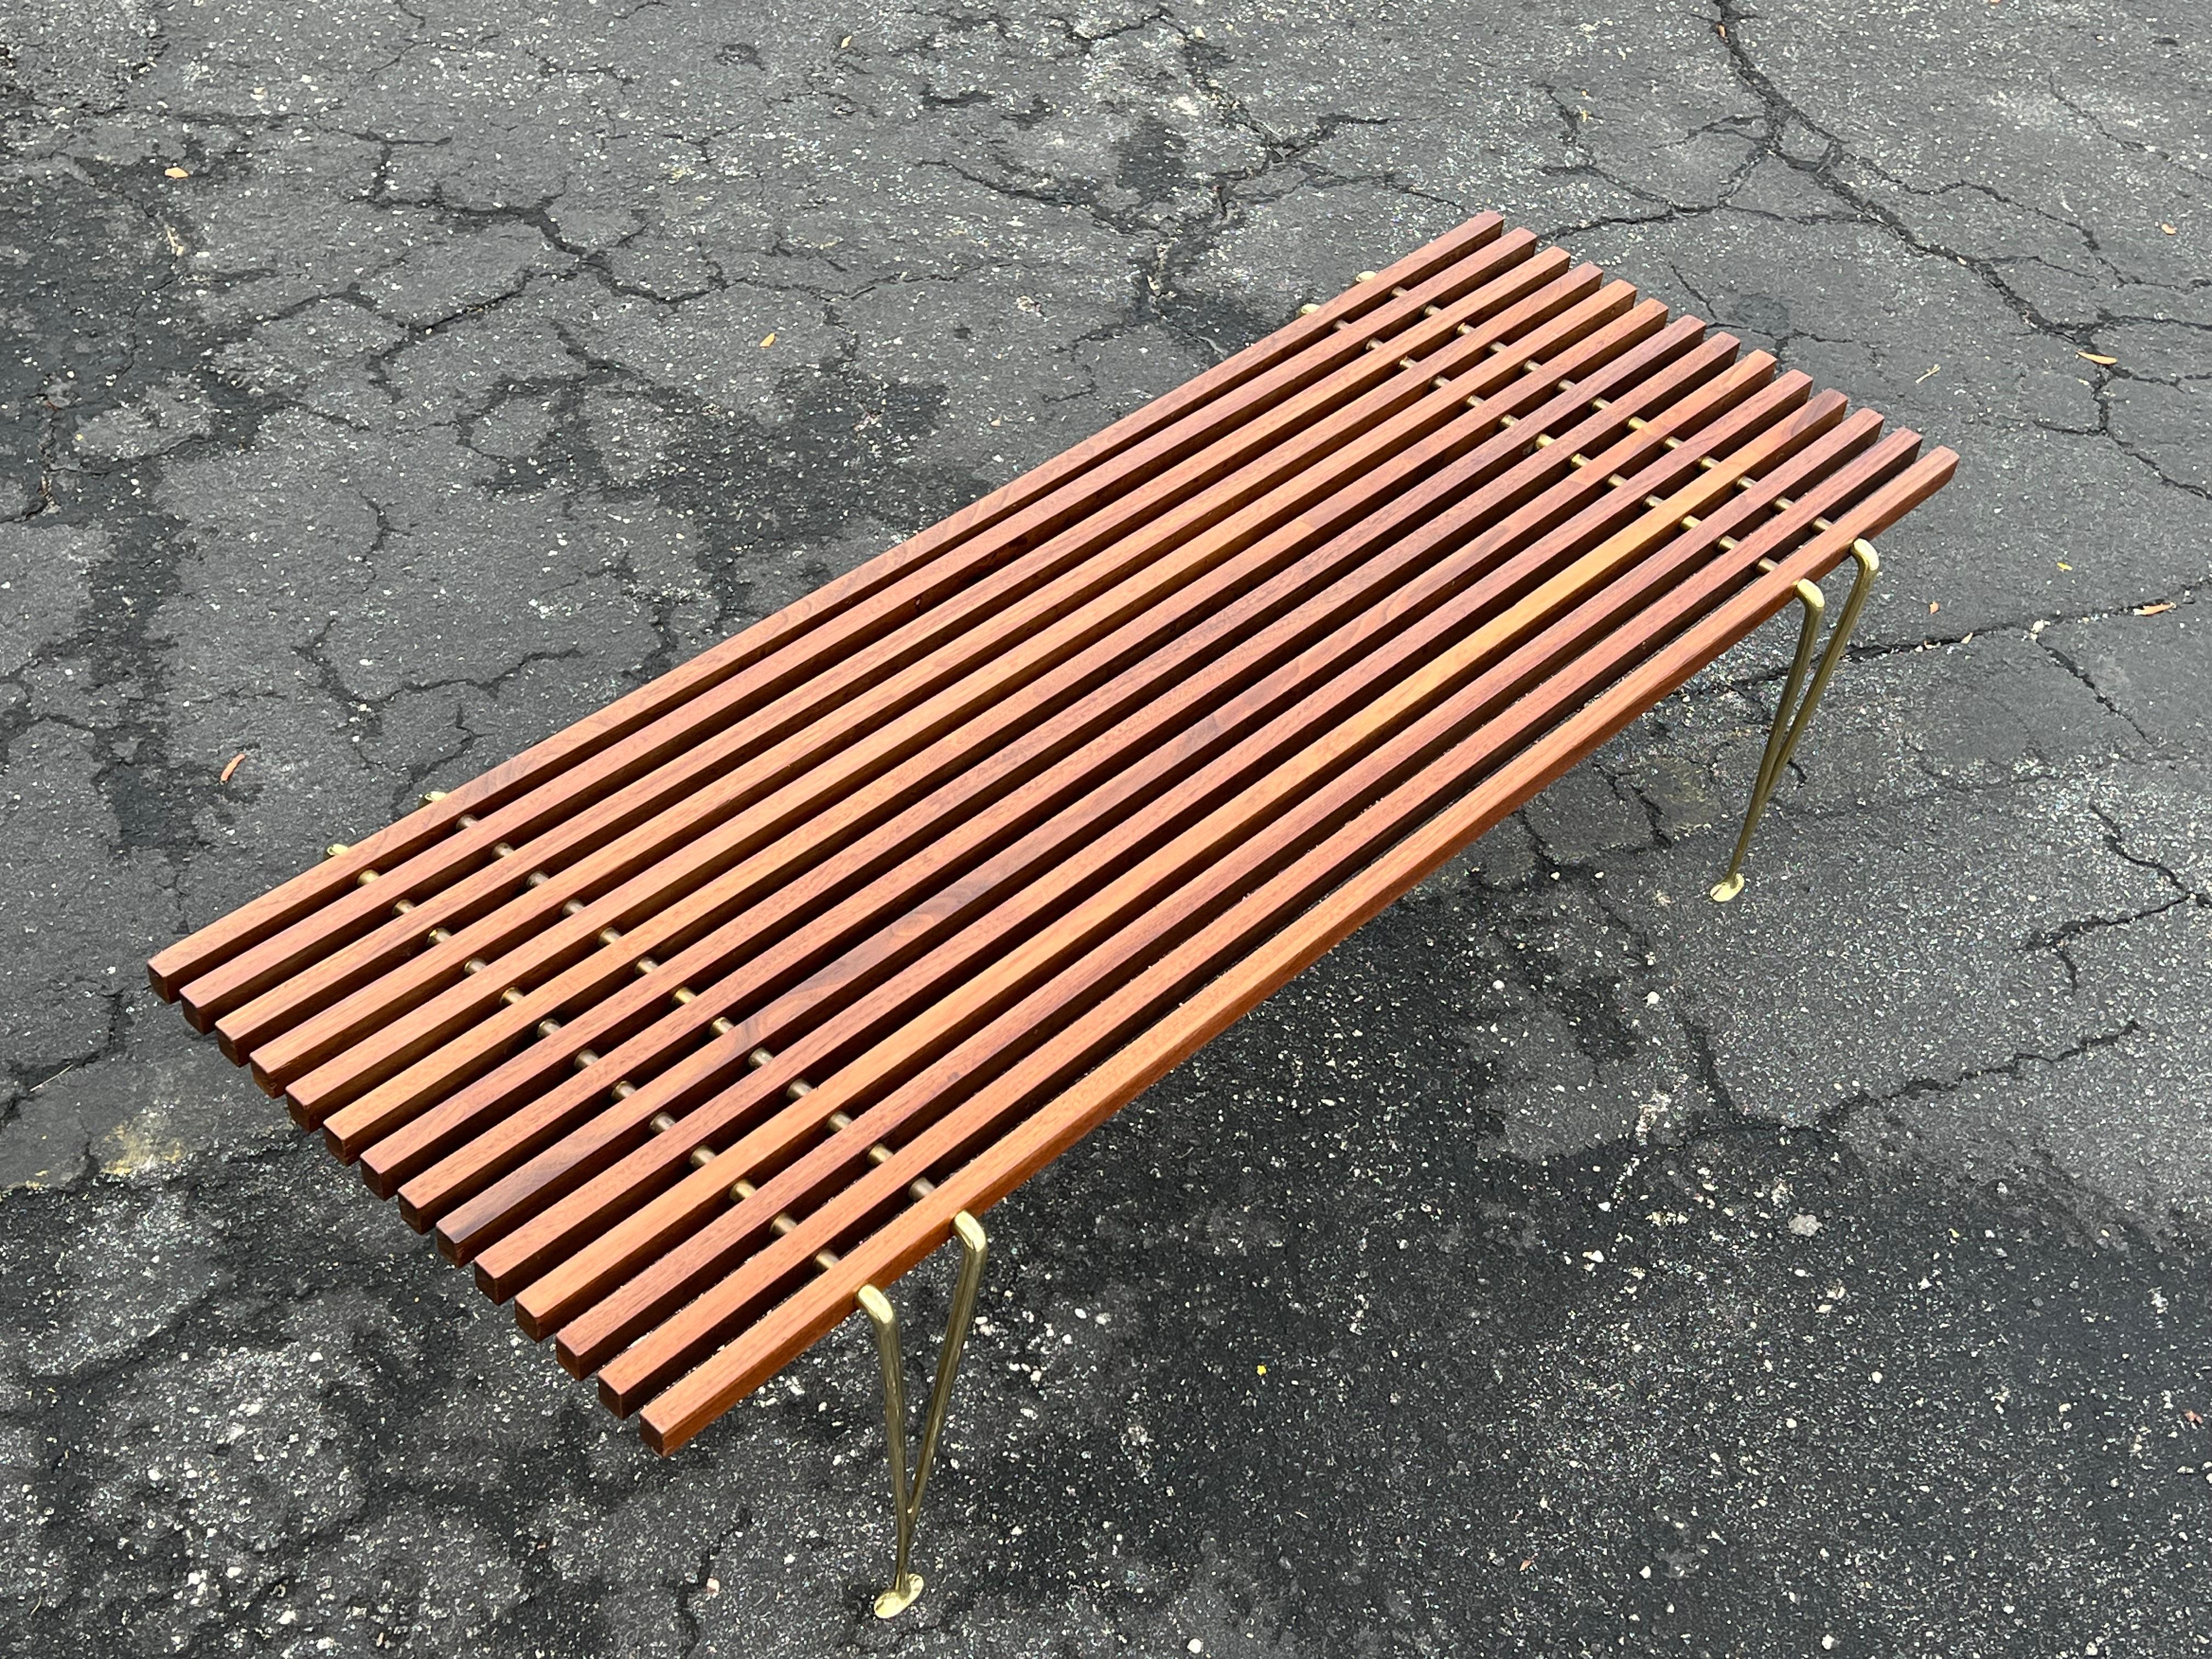 A classic Hugh Acton slat bench ca' 1950's. Solid brass Y shaped legs and slats make this a design favorite.